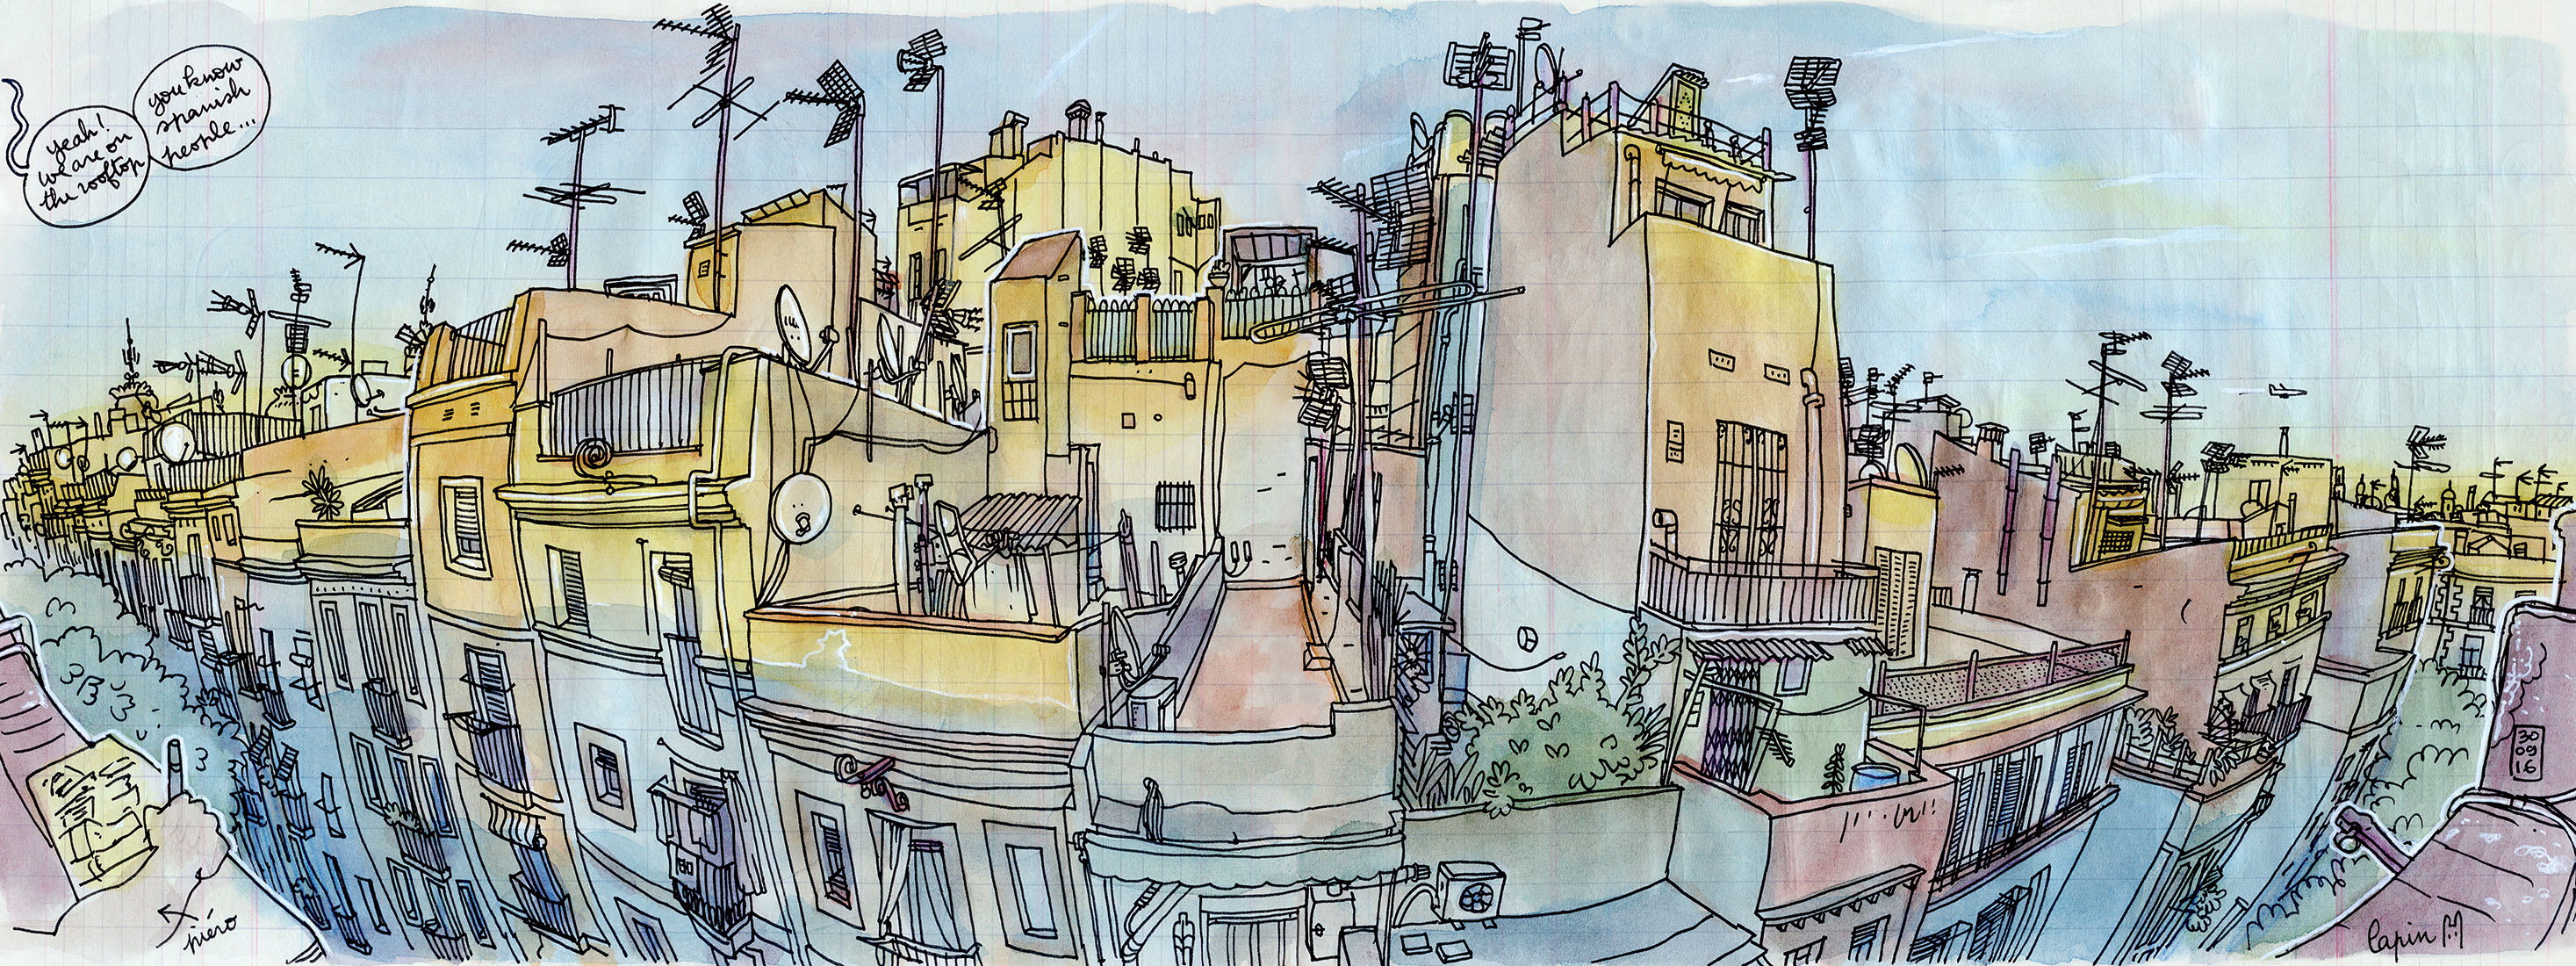 Plein Air Vs Urban Sketching What Is The Difference  Pentalic